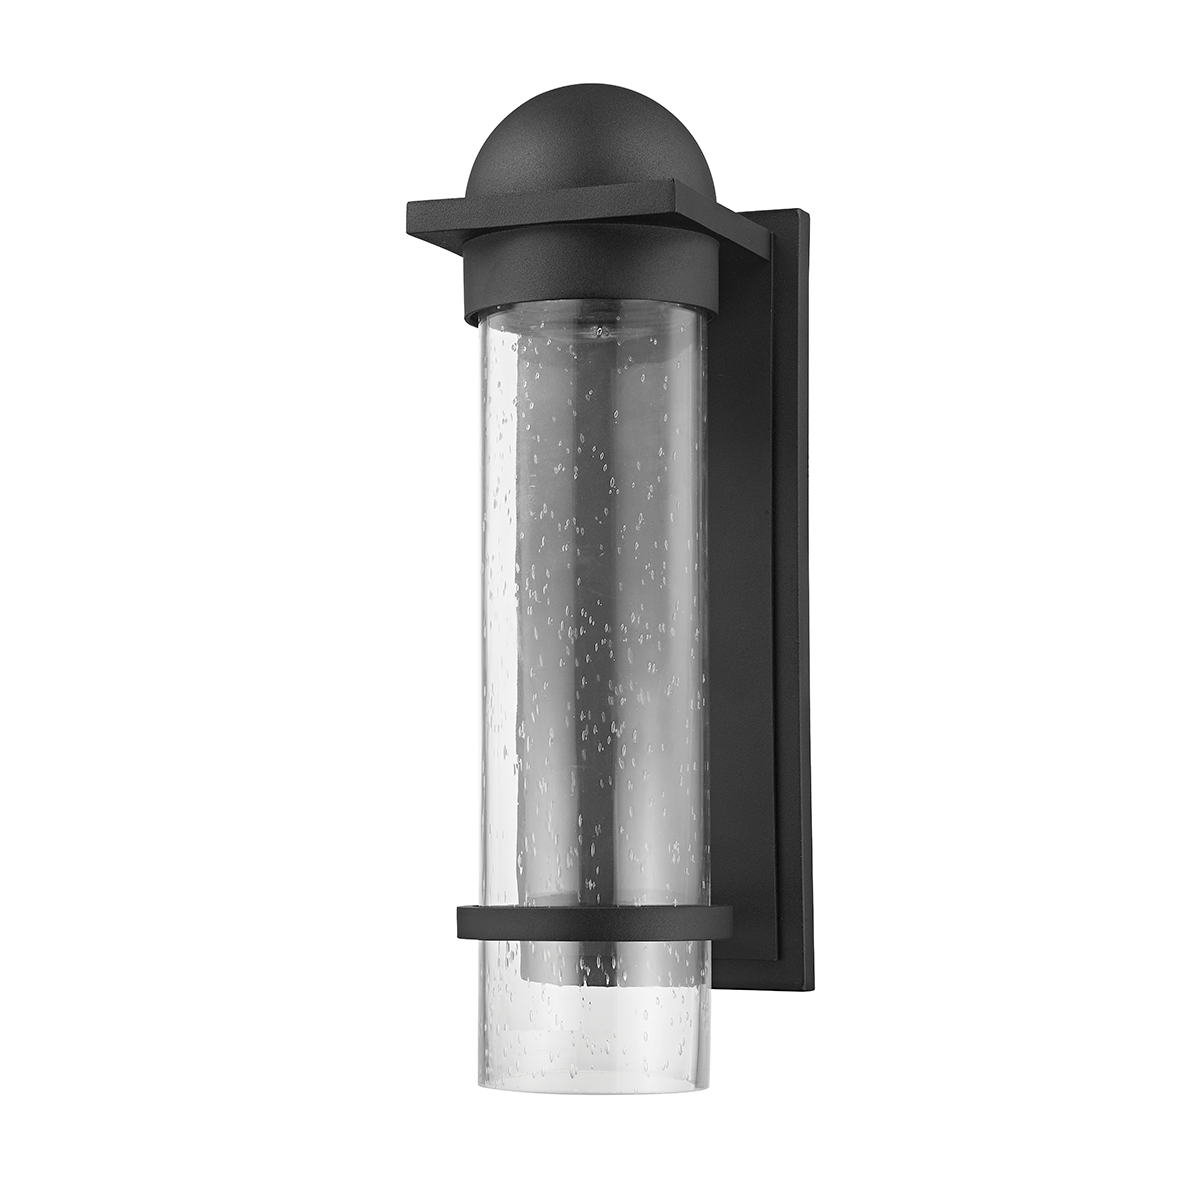 Troy Lighting 1 LIGHT LARGE EXTERIOR WALL SCONCE B7116